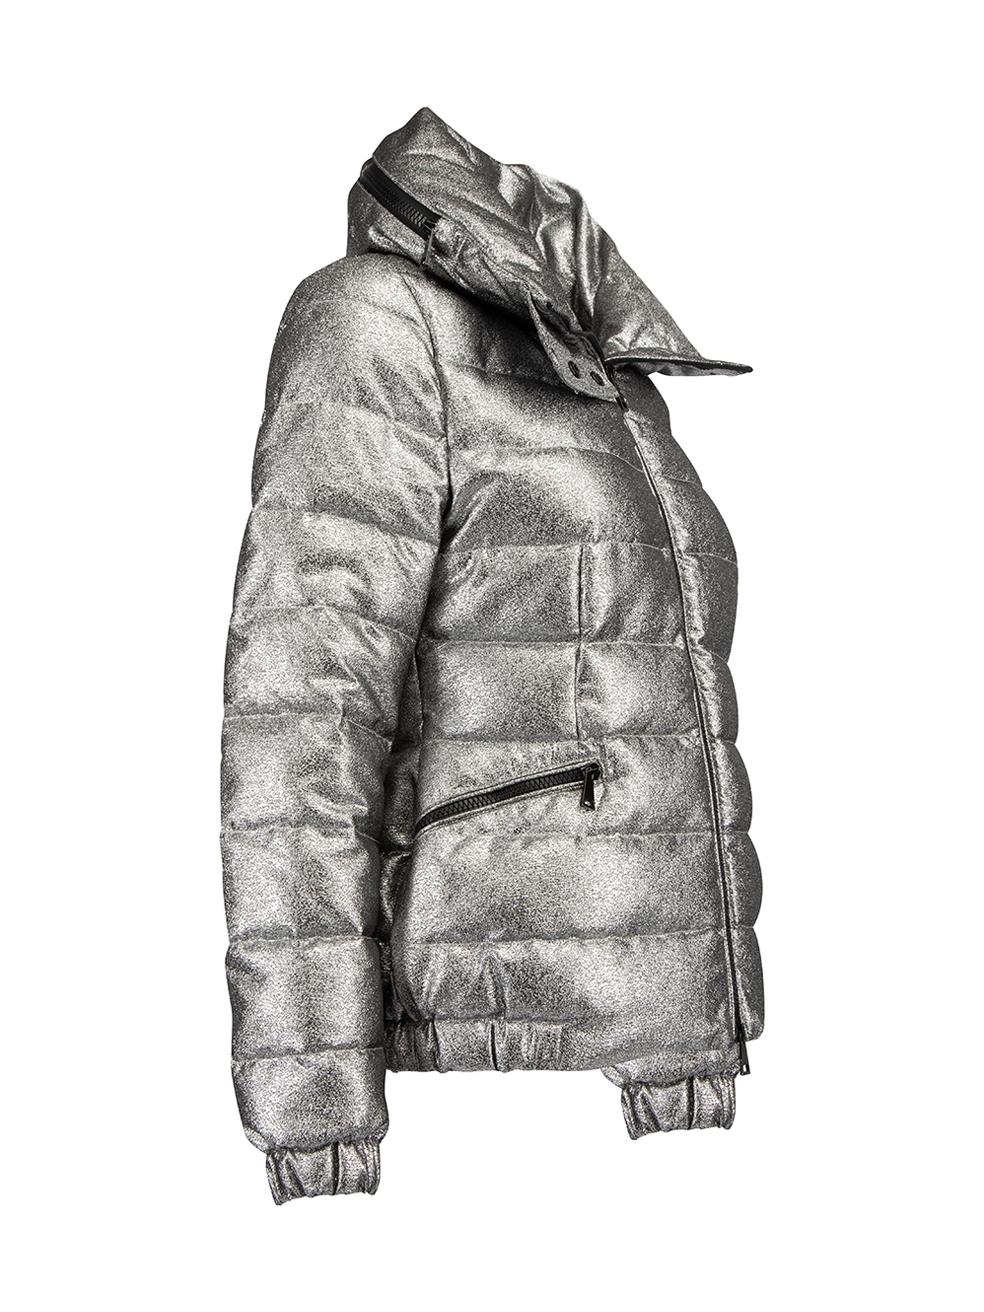 CONDITION is Very good. Hardly any visible wear to jacket is evident on this used Moncler designer resale item. Details Silver metallic Polyester Down jacket Short length Collapsible hood with zip closure on collar Front two way zip closure with